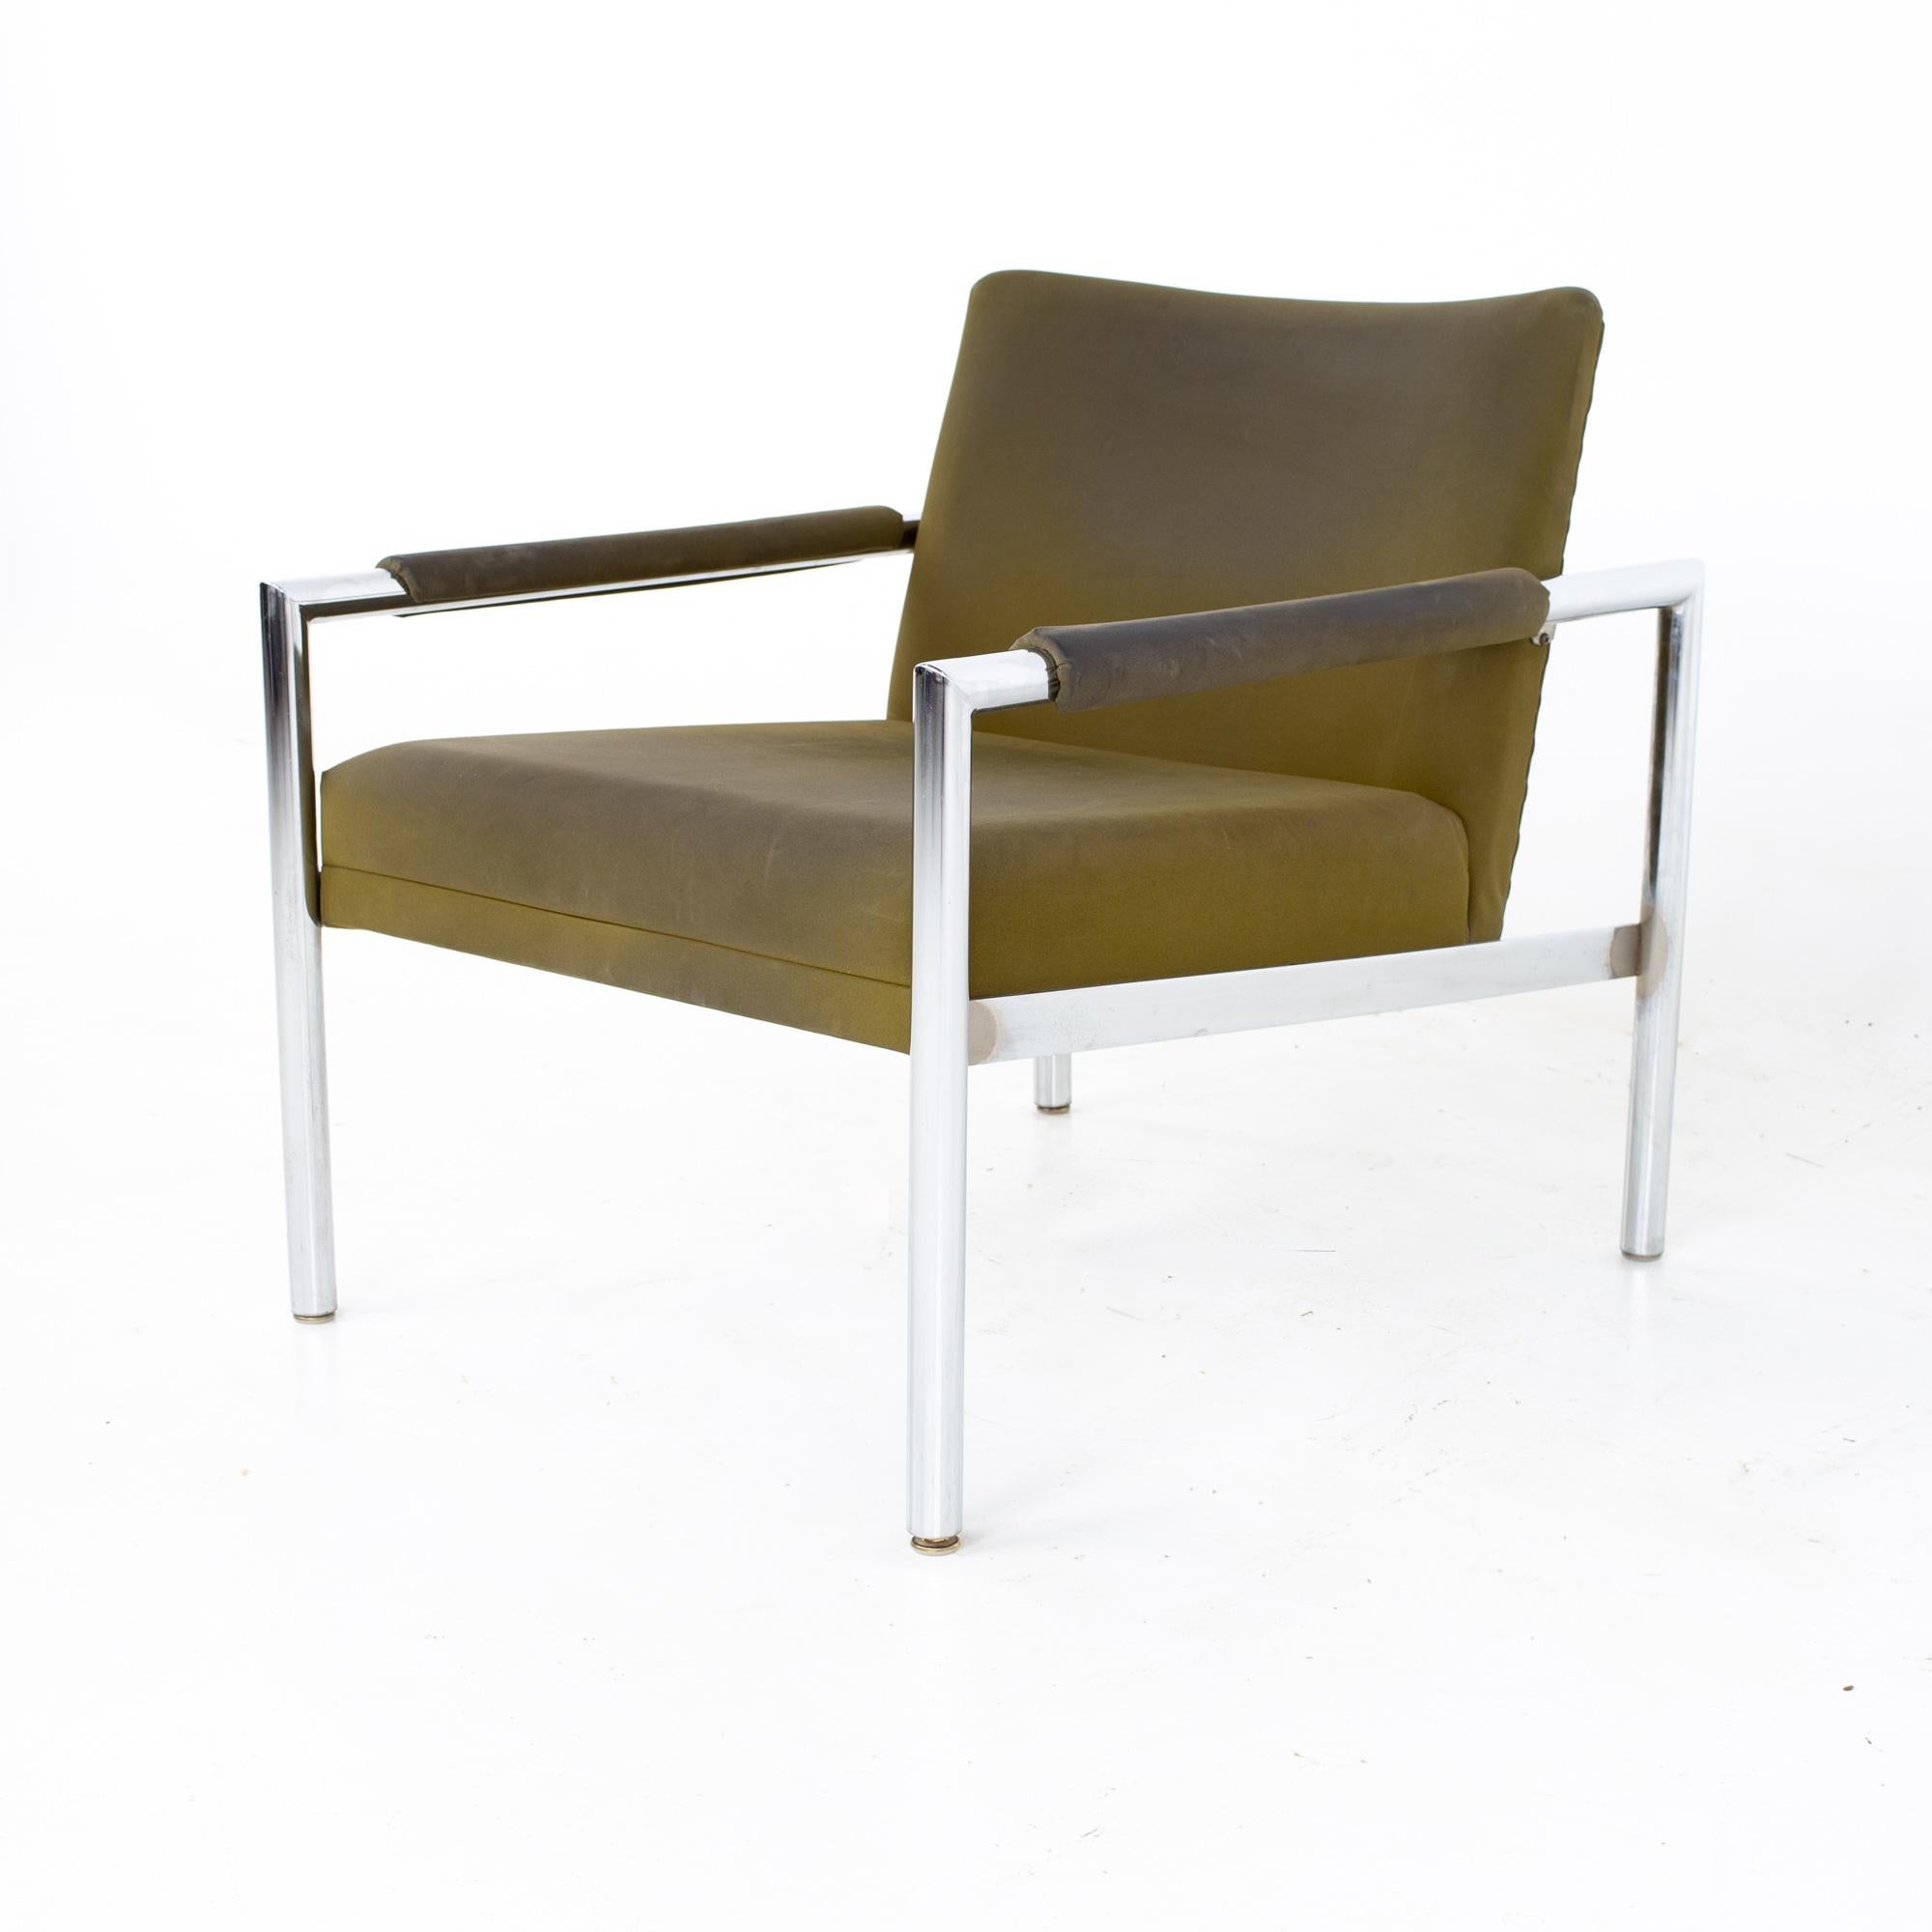 American Jack Cartwright for Founders Style Mid Century Chrome Lounge Chairs, a Pair